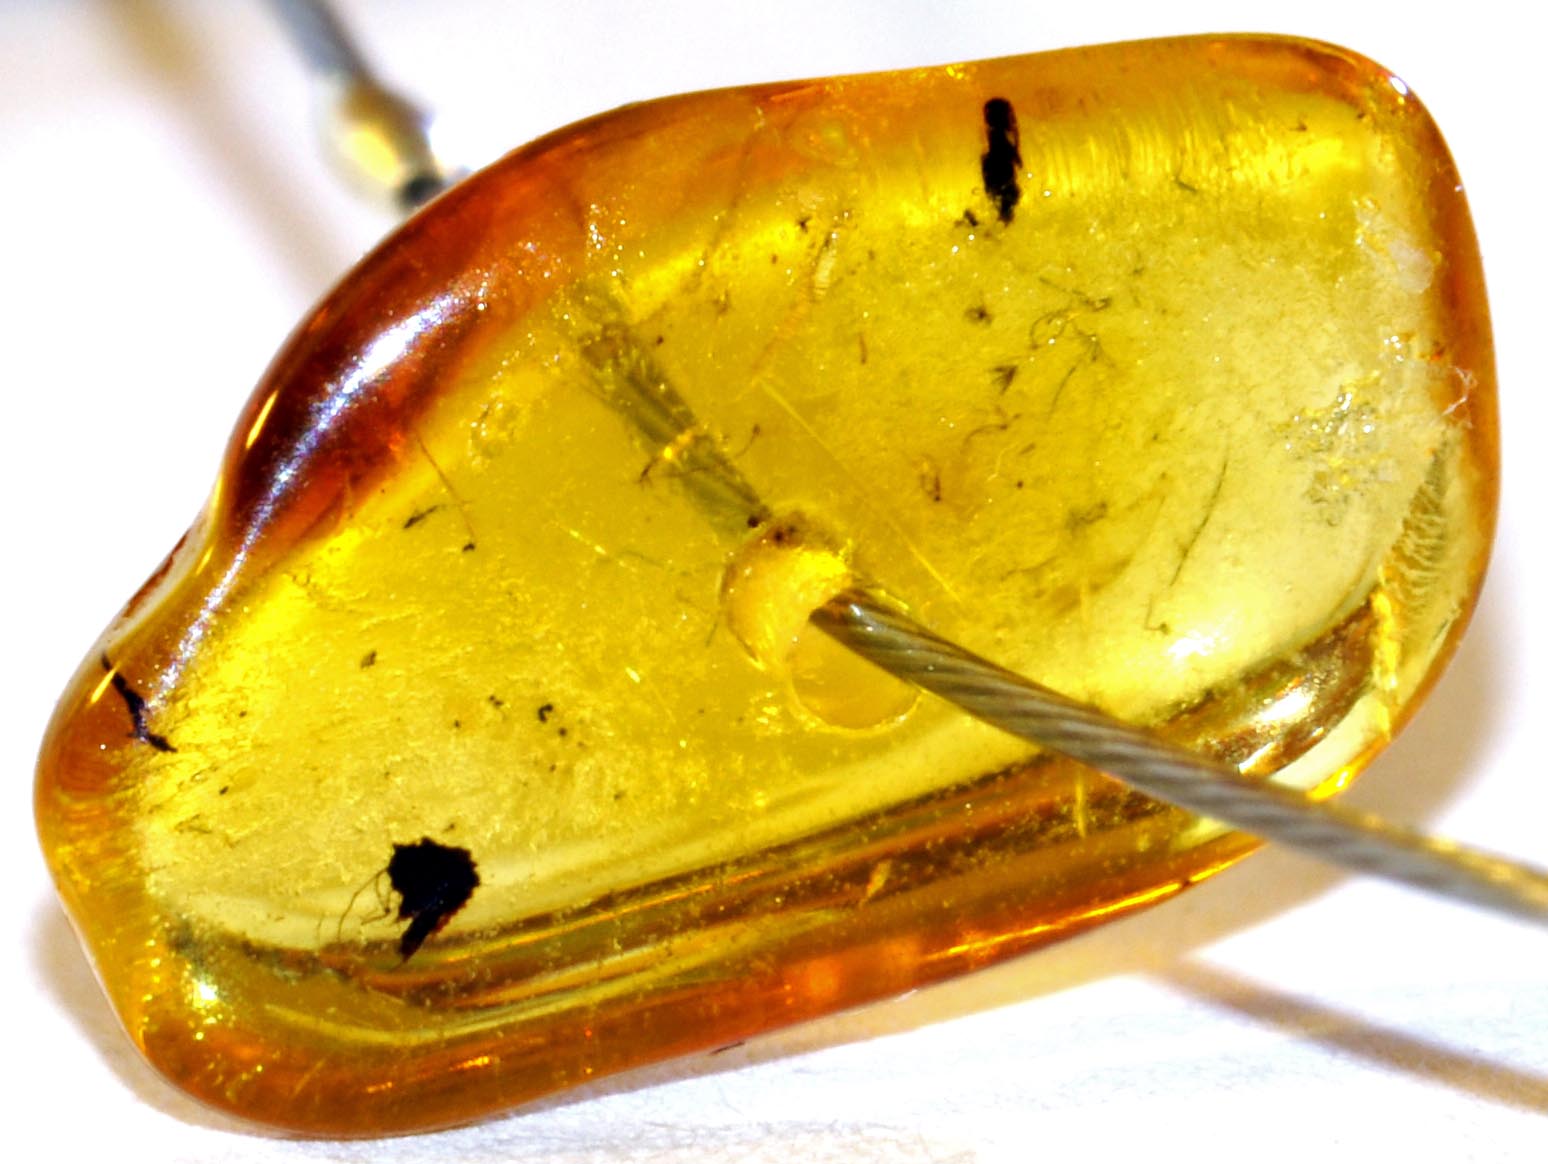 #Fossil insects in amber.